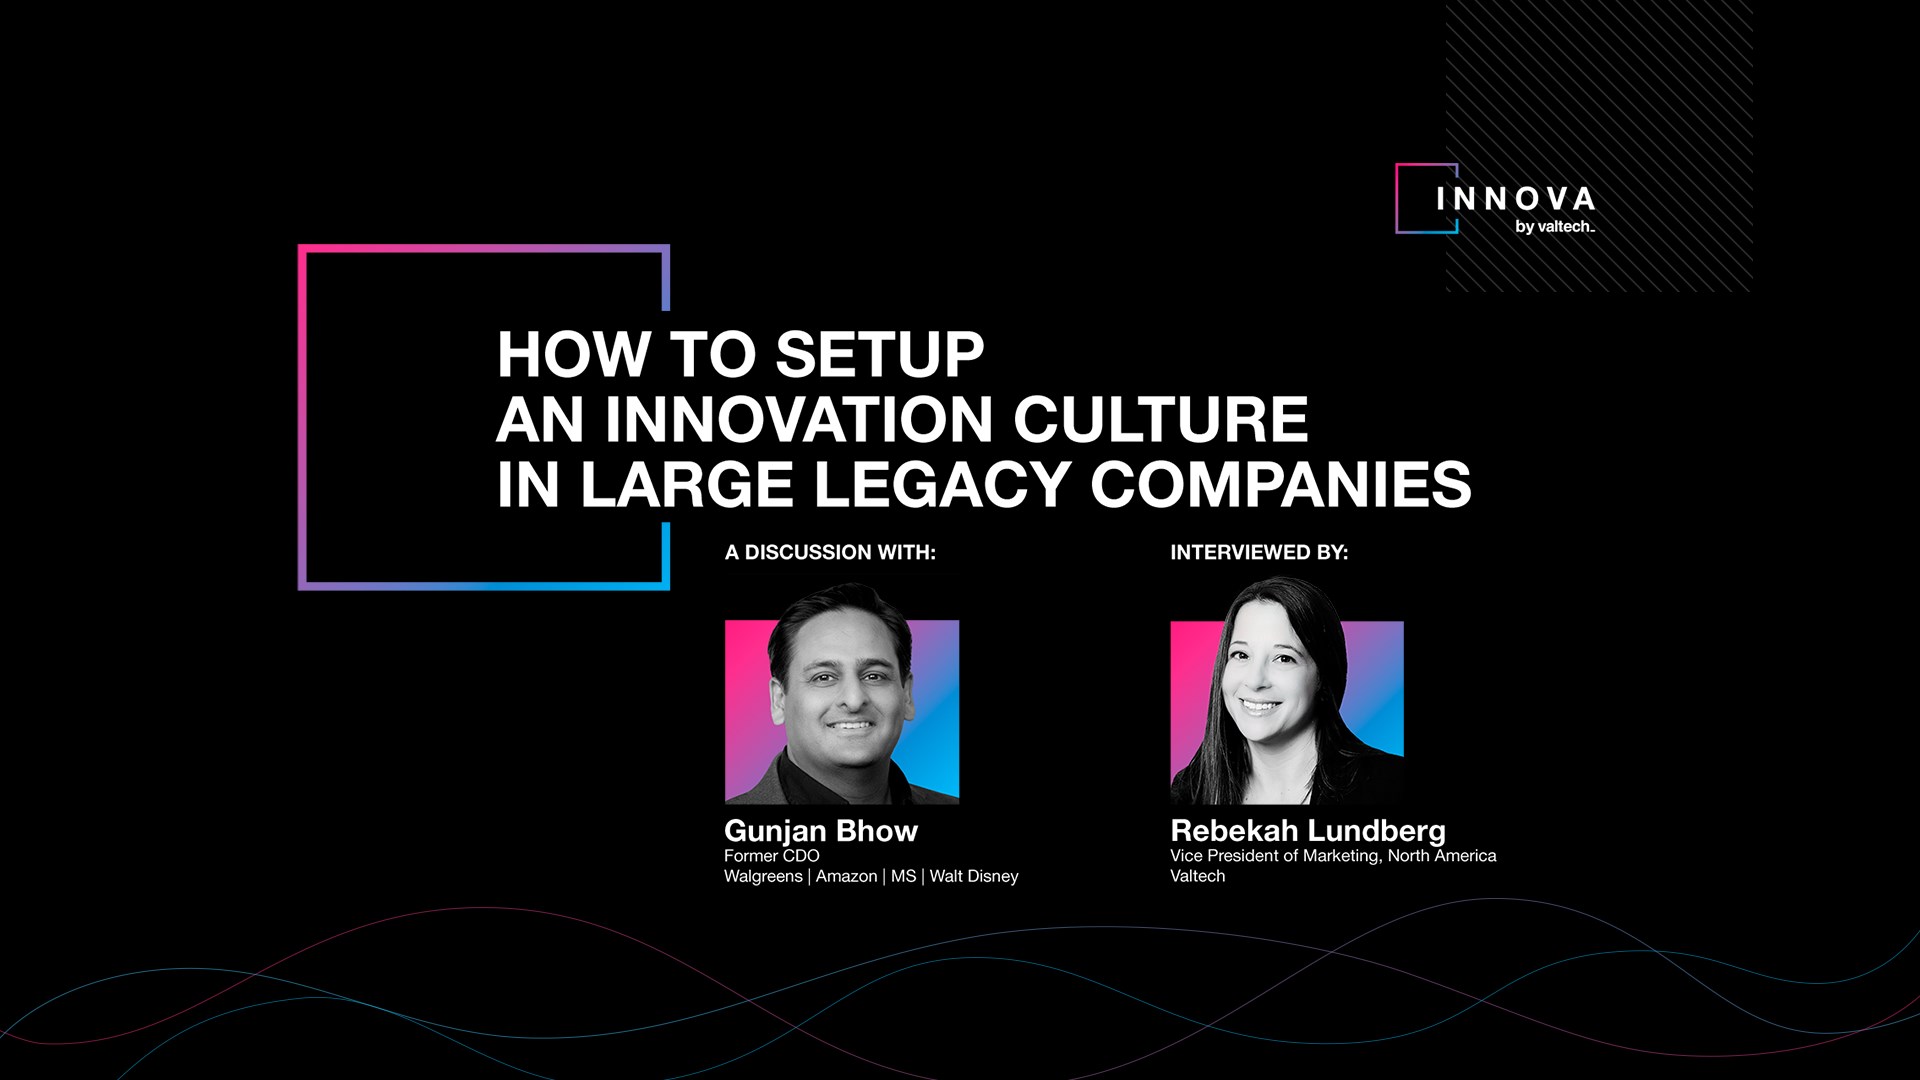 How to setup an innovation culture in large legacy companies